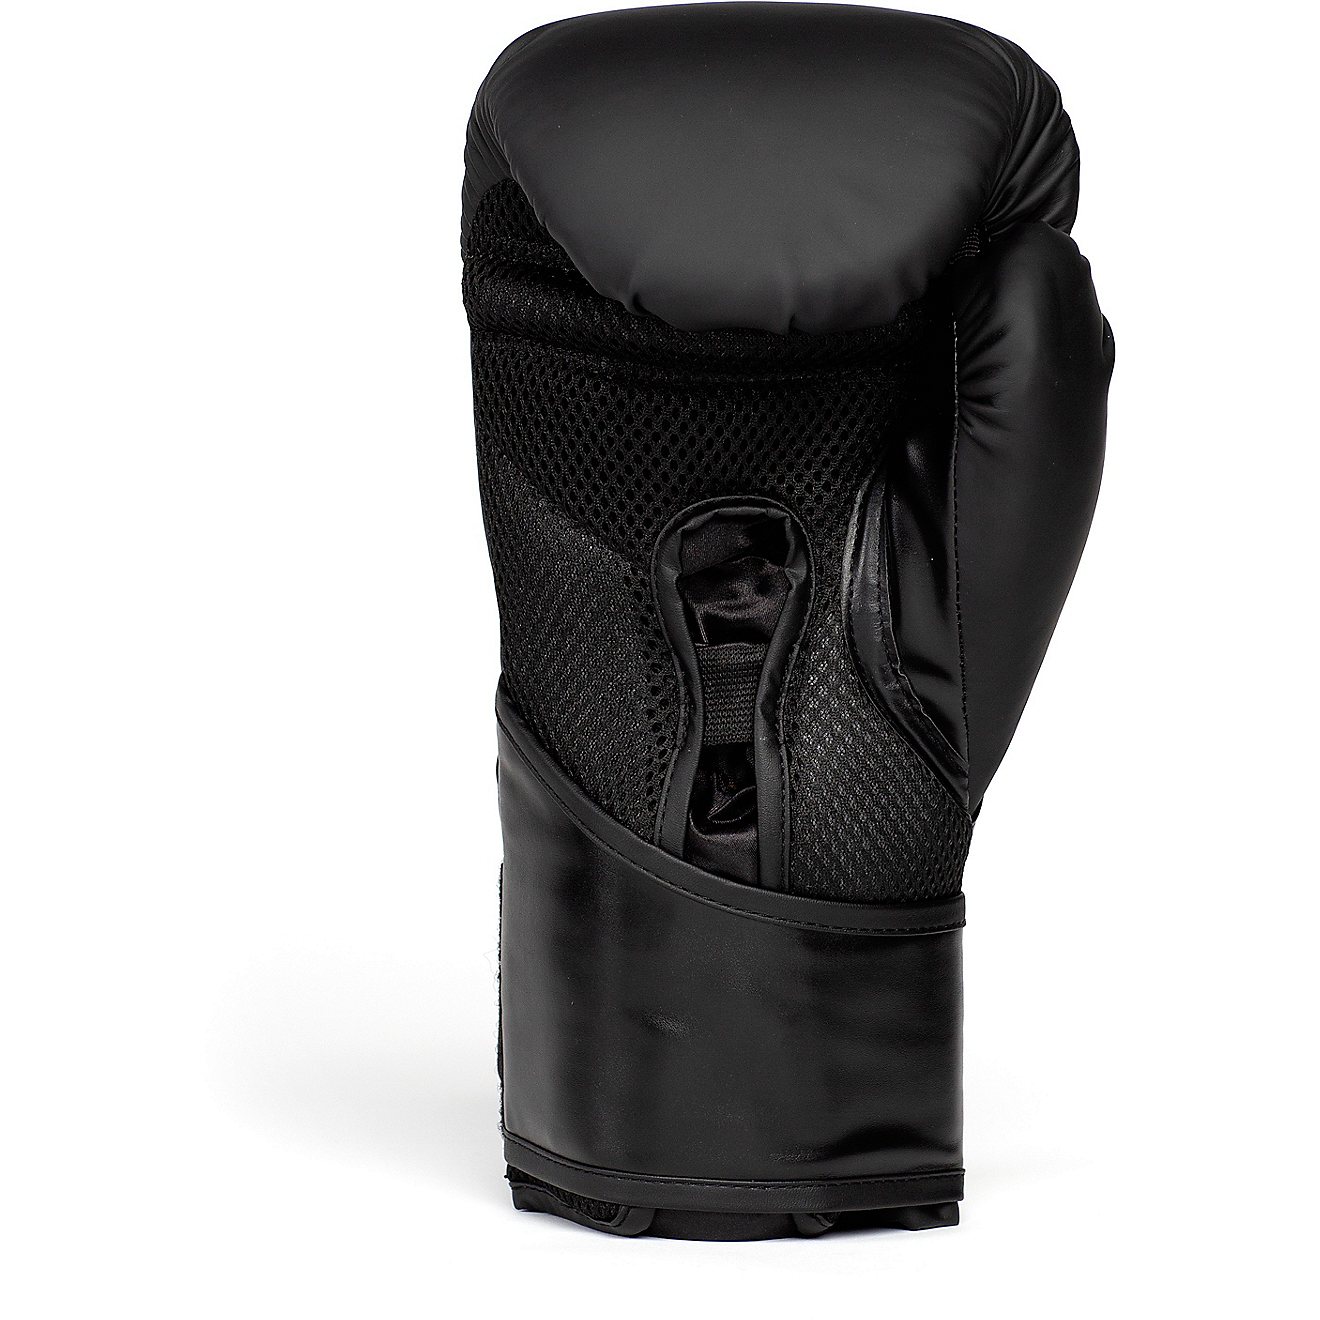 Everlast Adults' Elite 2 Boxing Gloves                                                                                           - view number 5